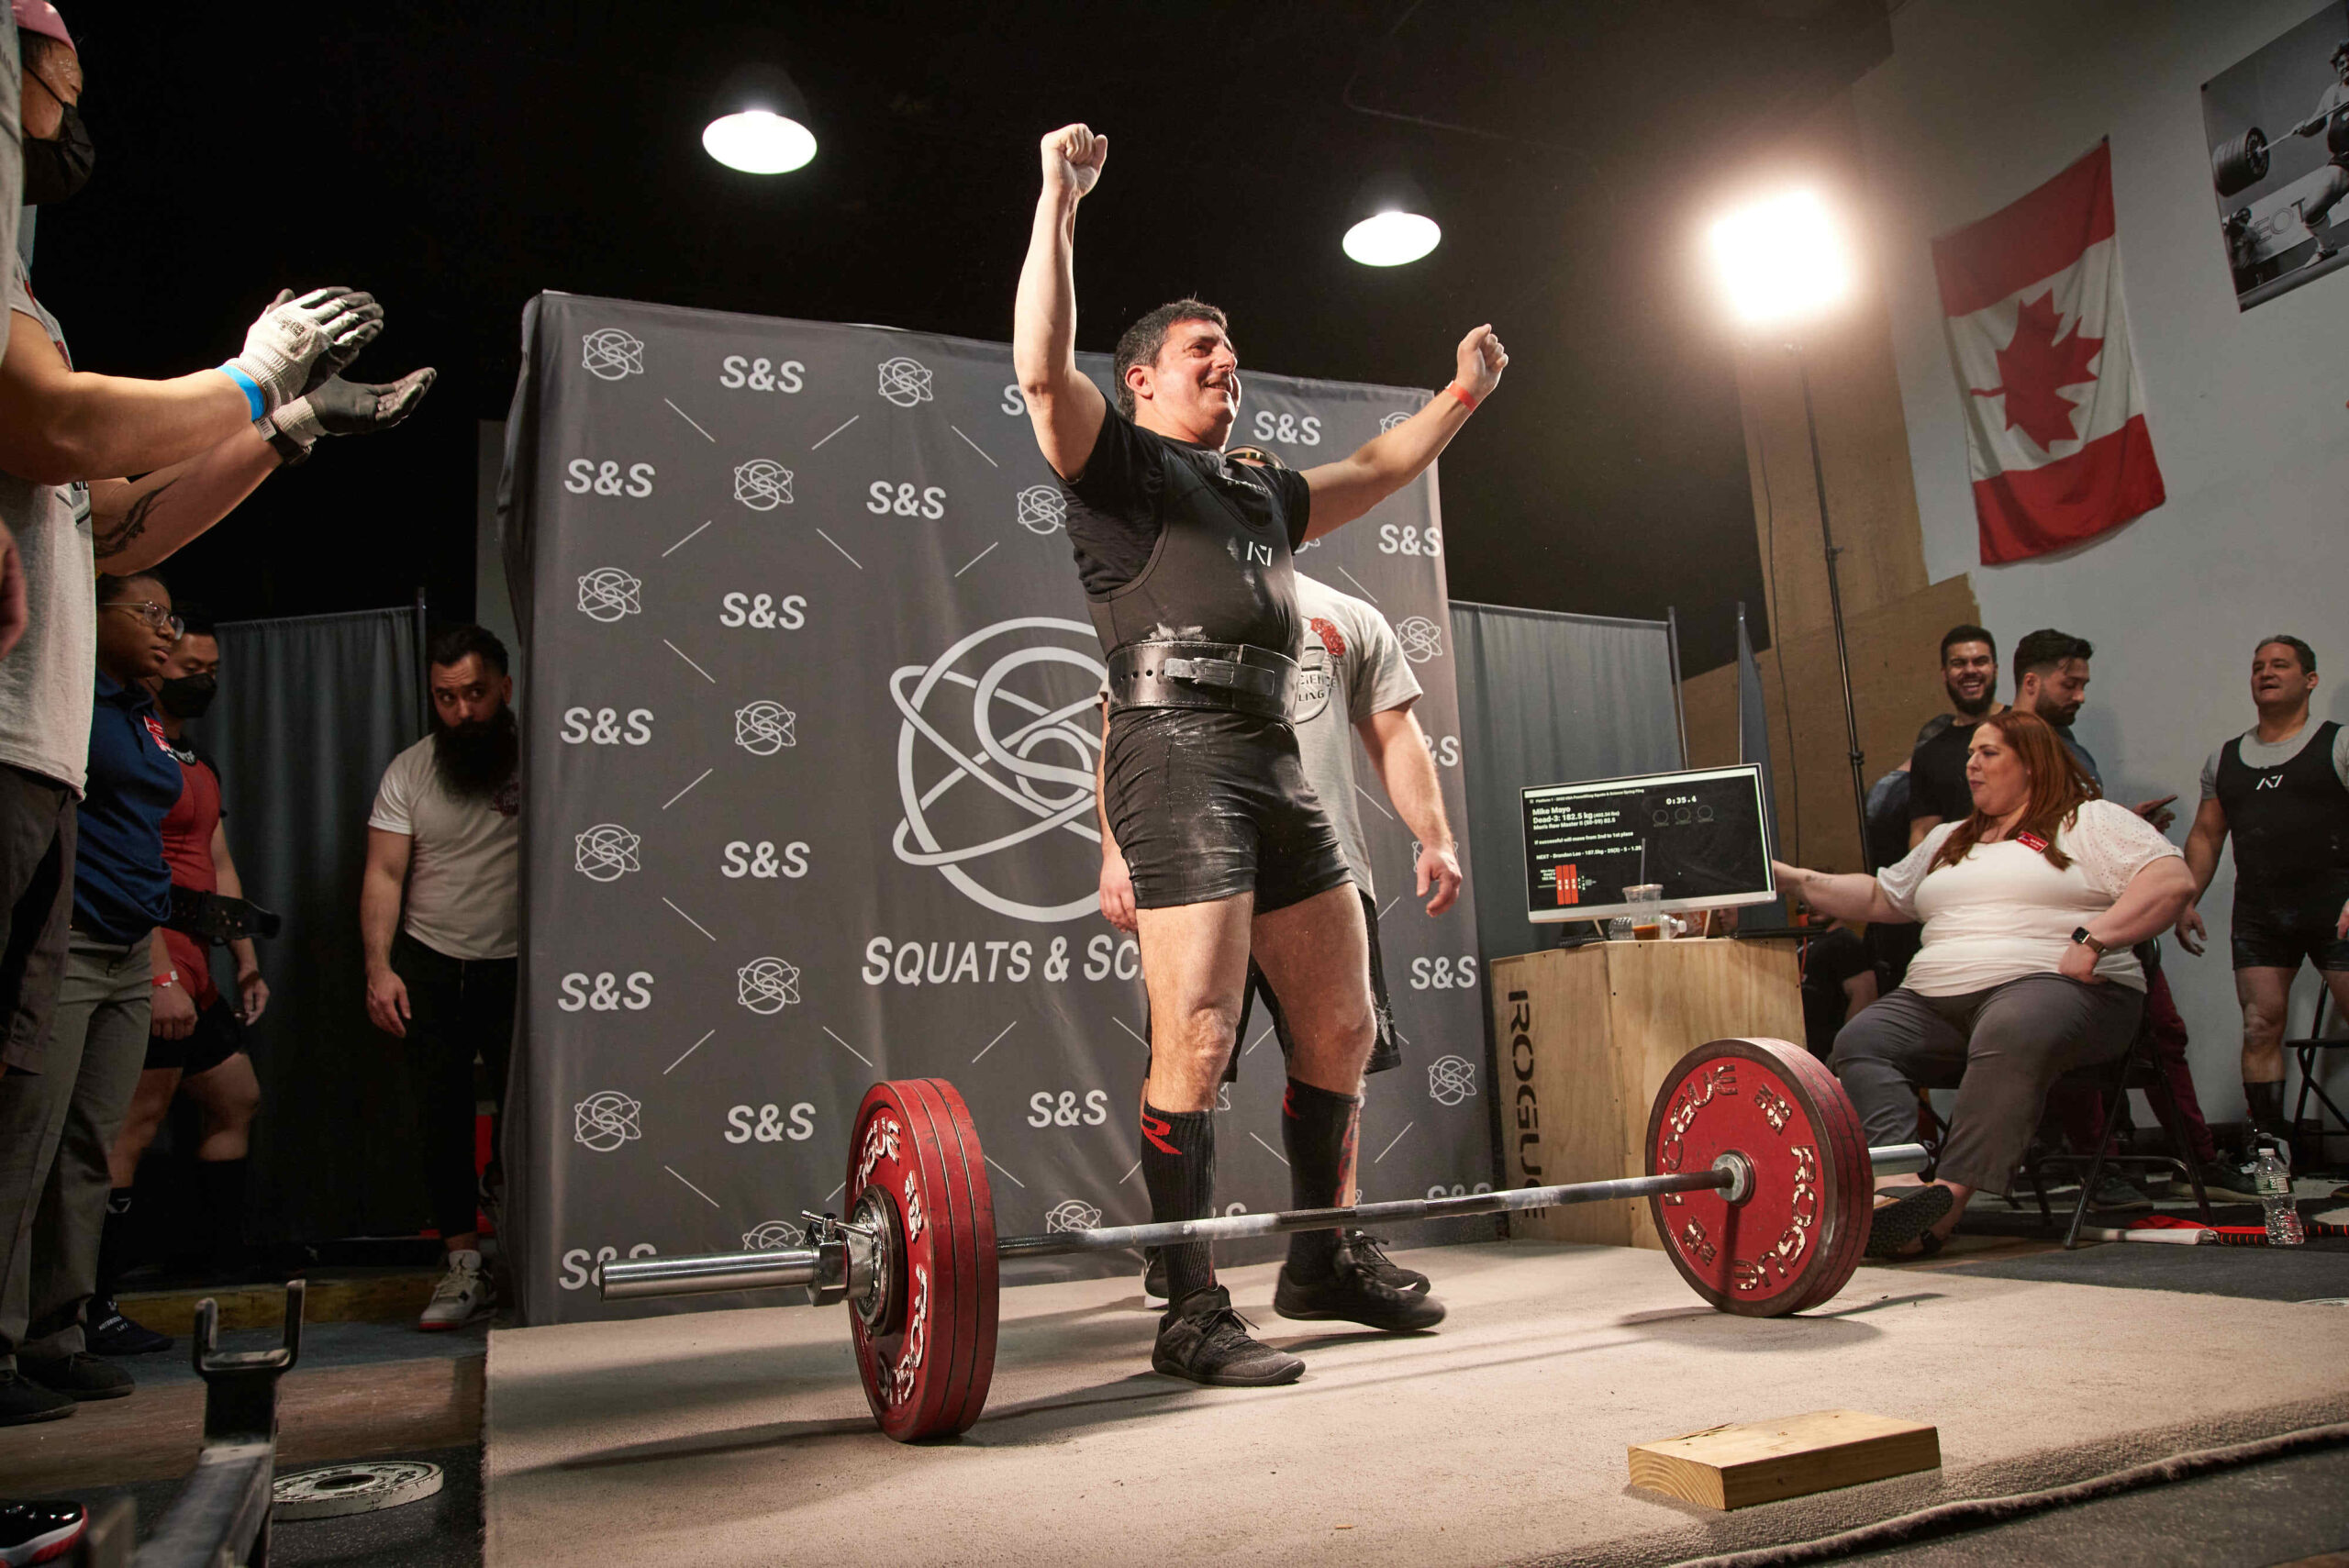 Fargo powerlifter holds national and state records - InForum